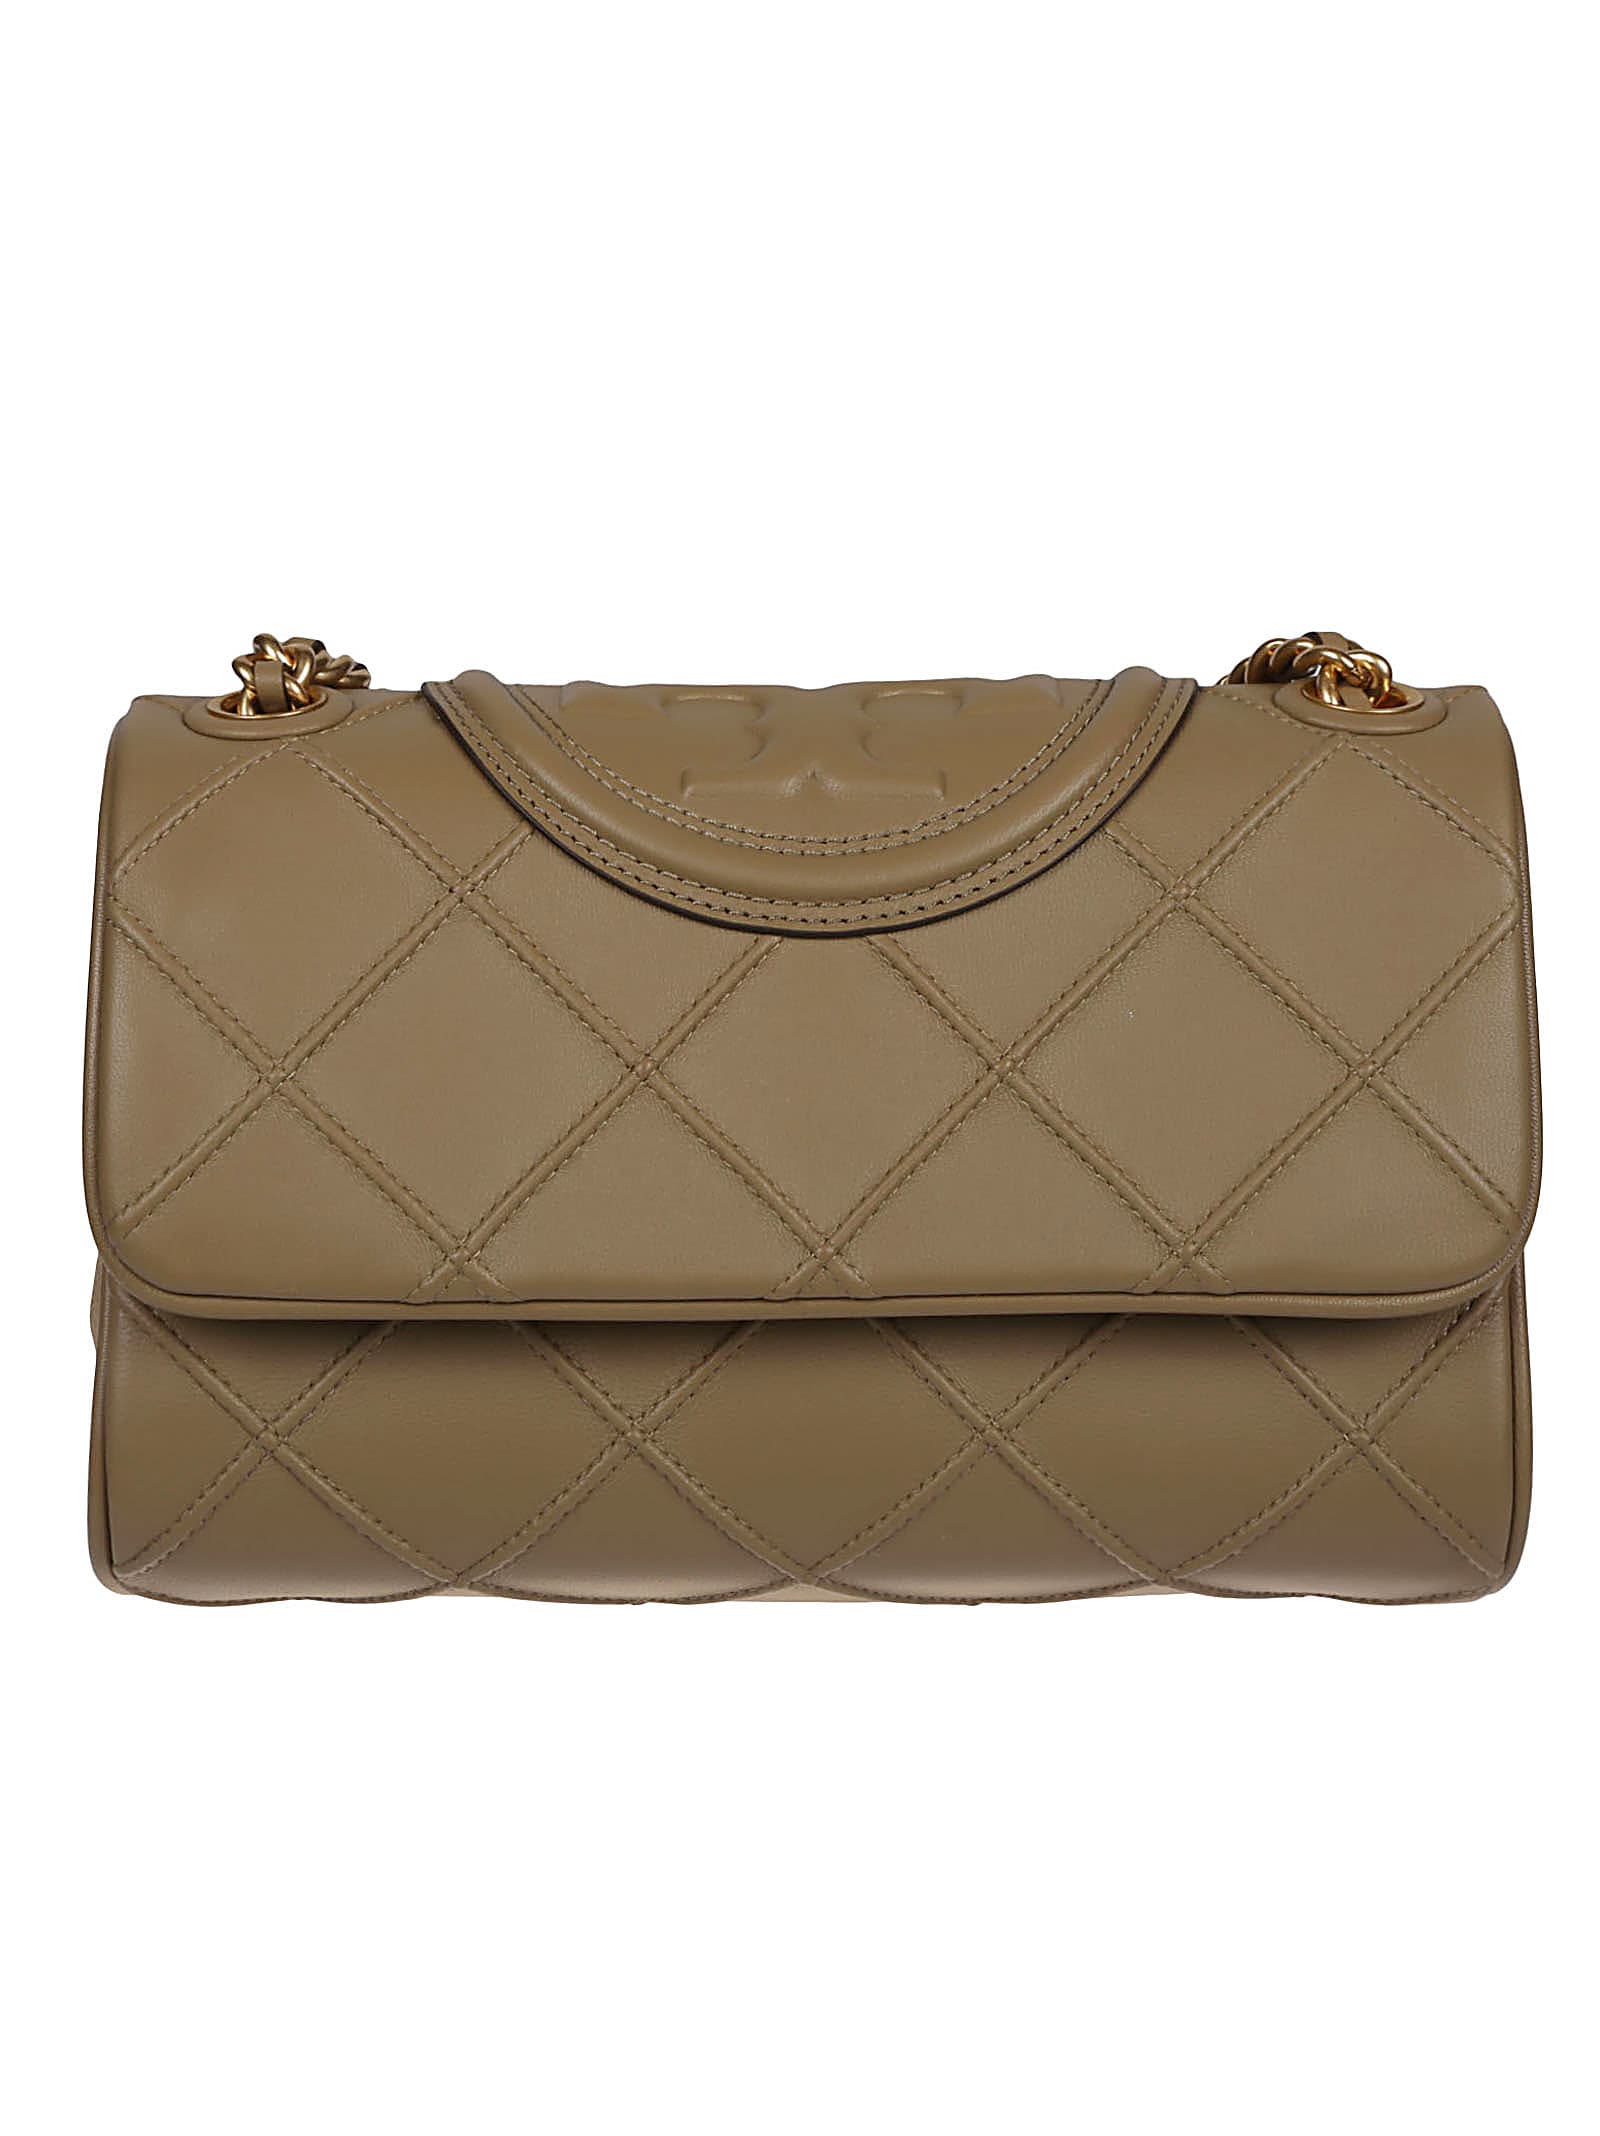 Tory Burch, Bags, Nwt Tory Burch Quilted Leather Fleming Soft Small  Convertible Shoulder B